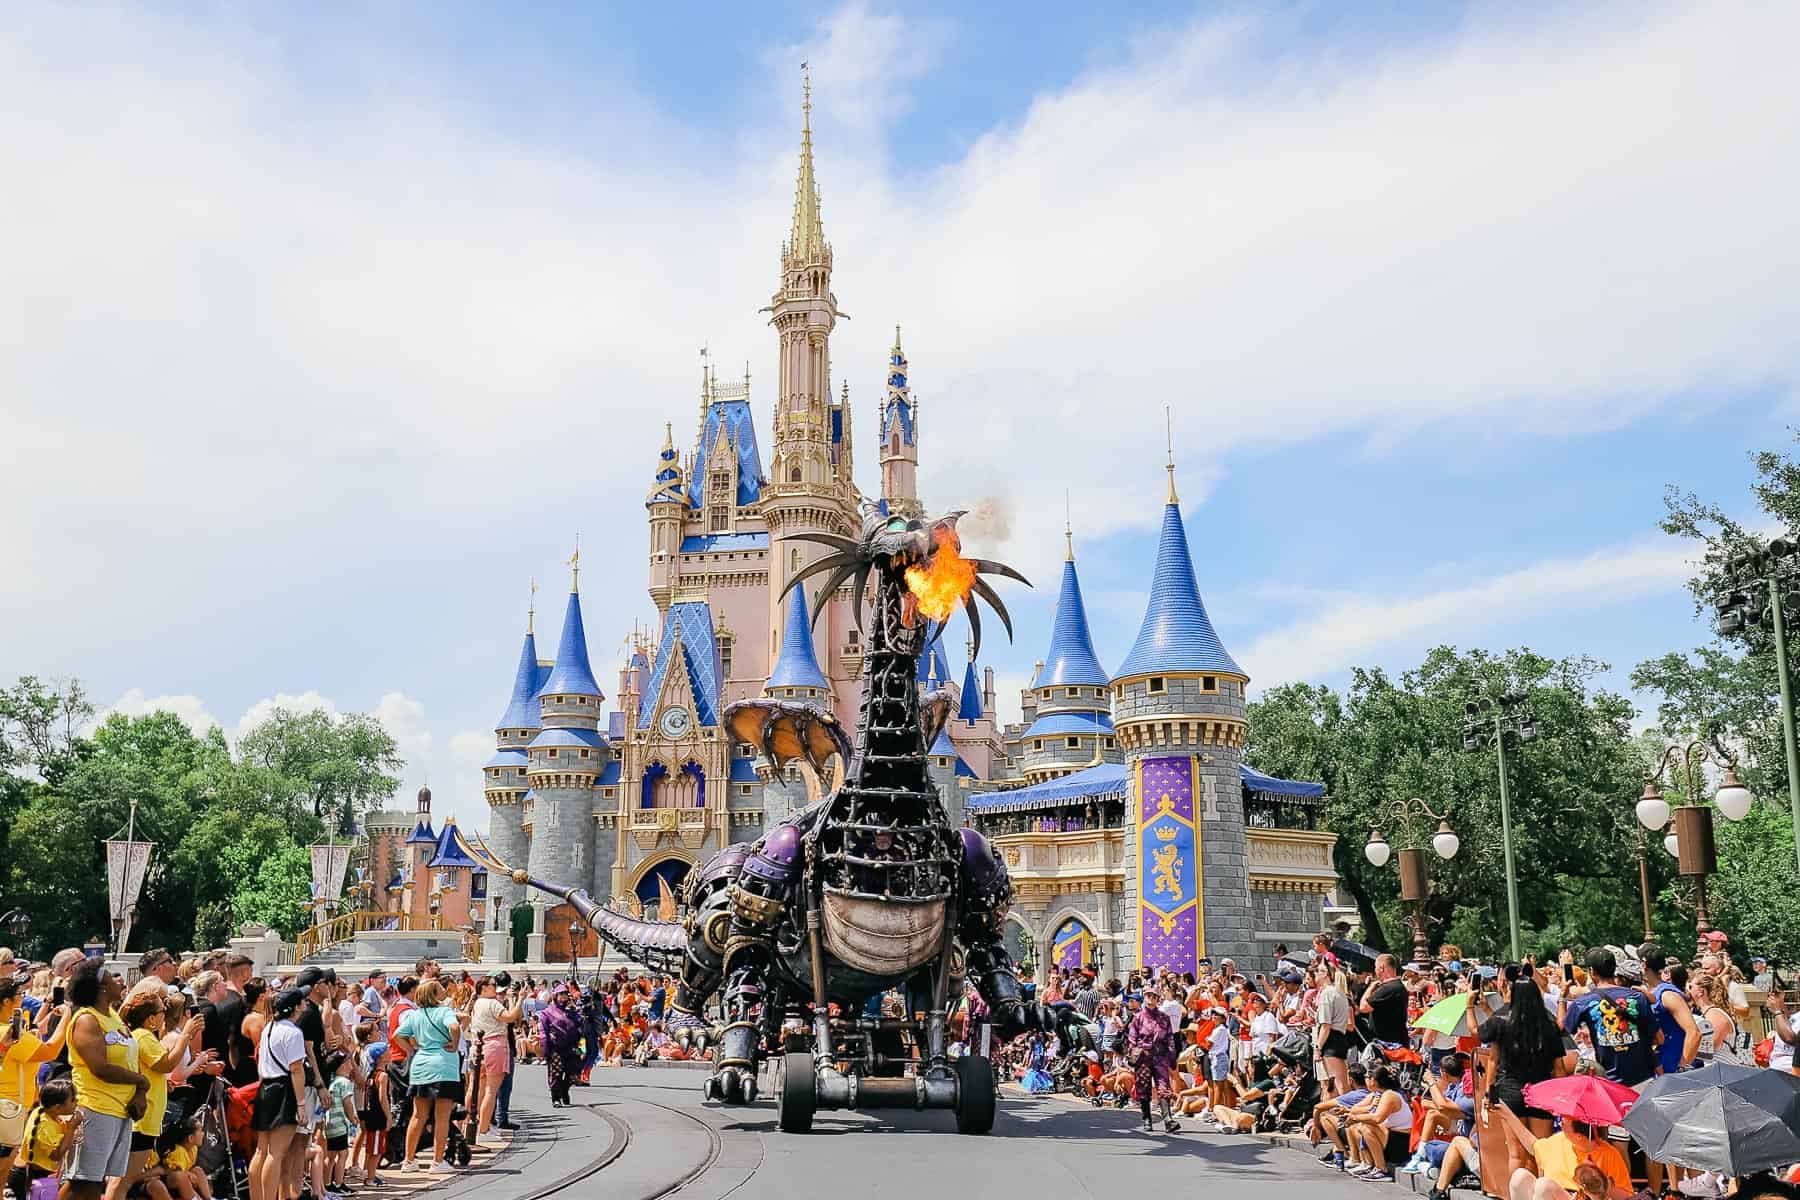 Maleficents dragon breathing fire during the parade. 